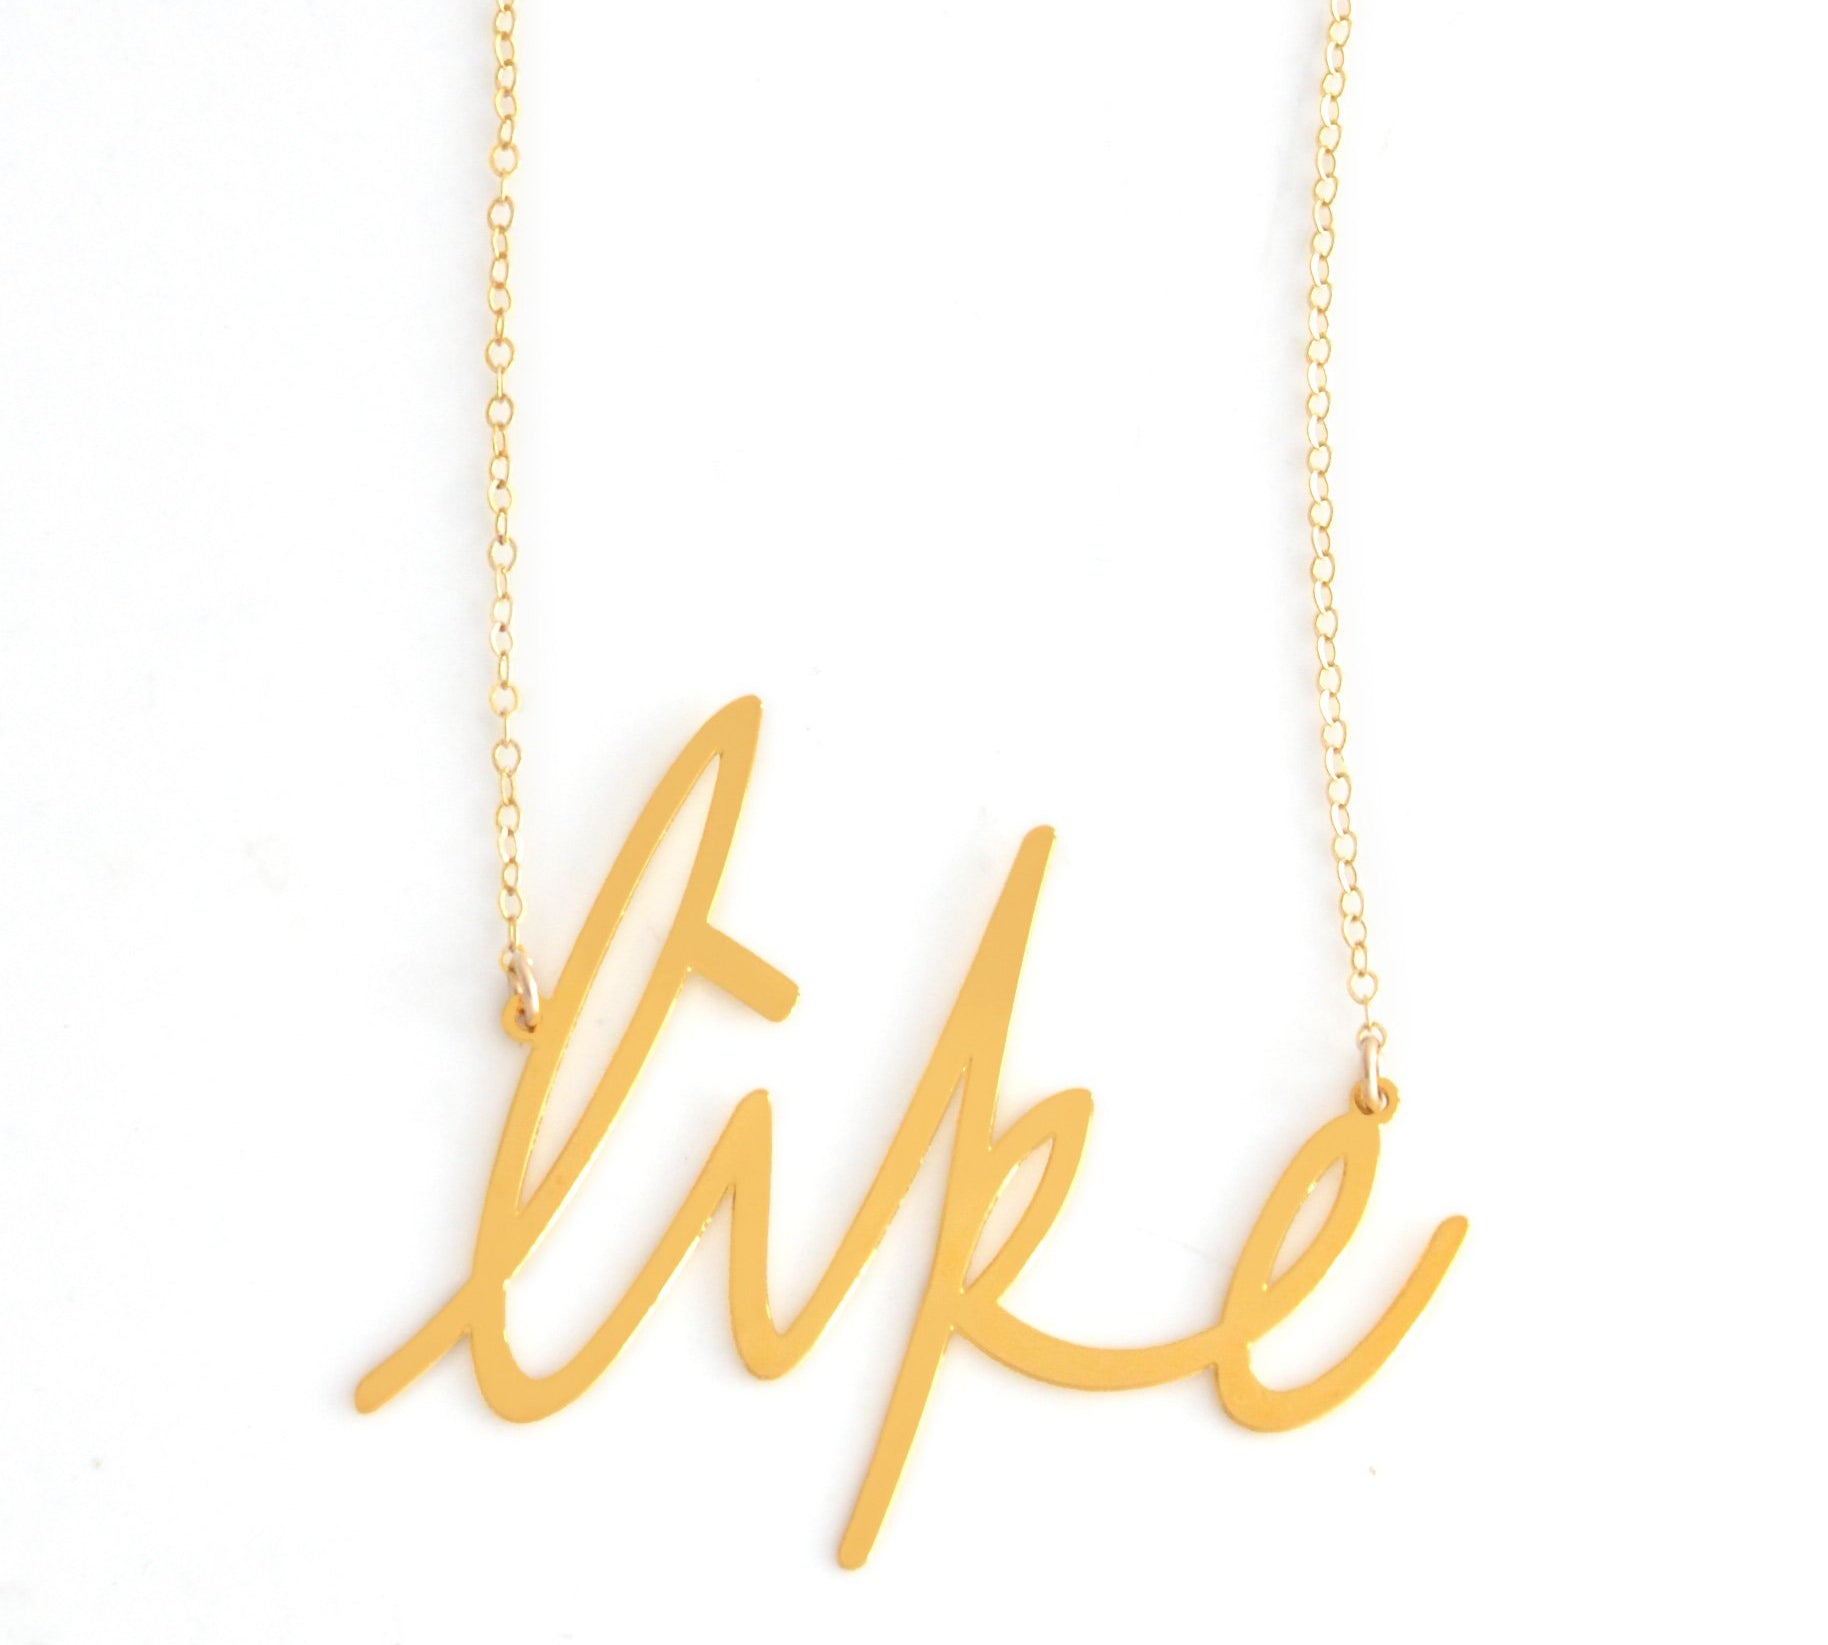 Like Necklace - High Quality, Affordable, Hand Written, Self Love, Mantra Word Necklace - Available in Gold and Silver - Small and Large Sizes - Made in USA - Brevity Jewelry